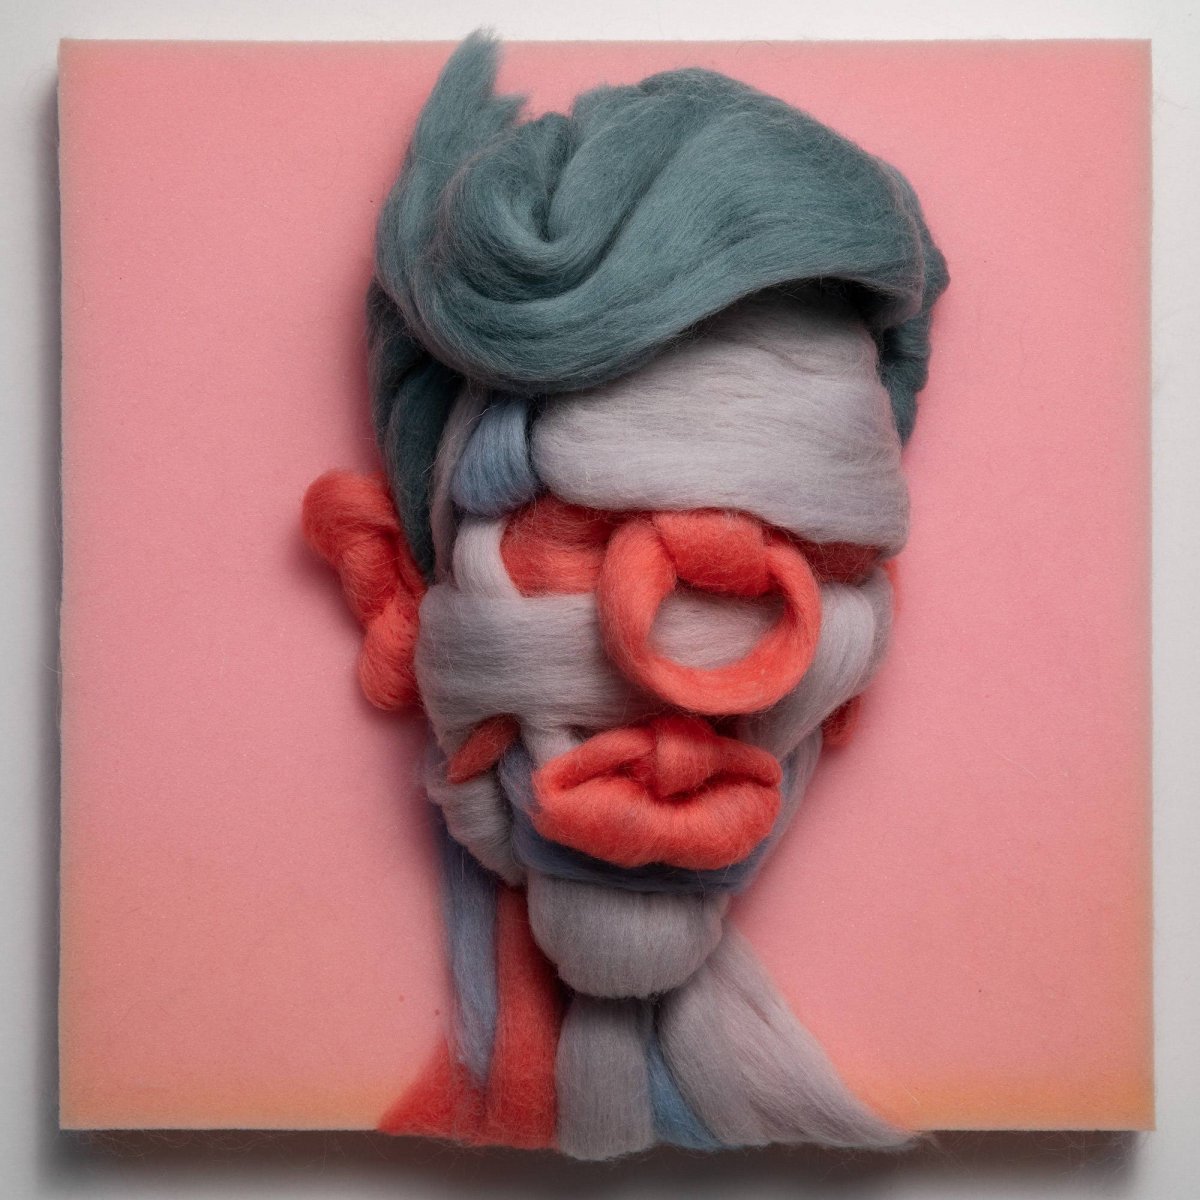 Expressive Sculptural Portraits Made Of Raw Wool By Salman Khoshroo 3